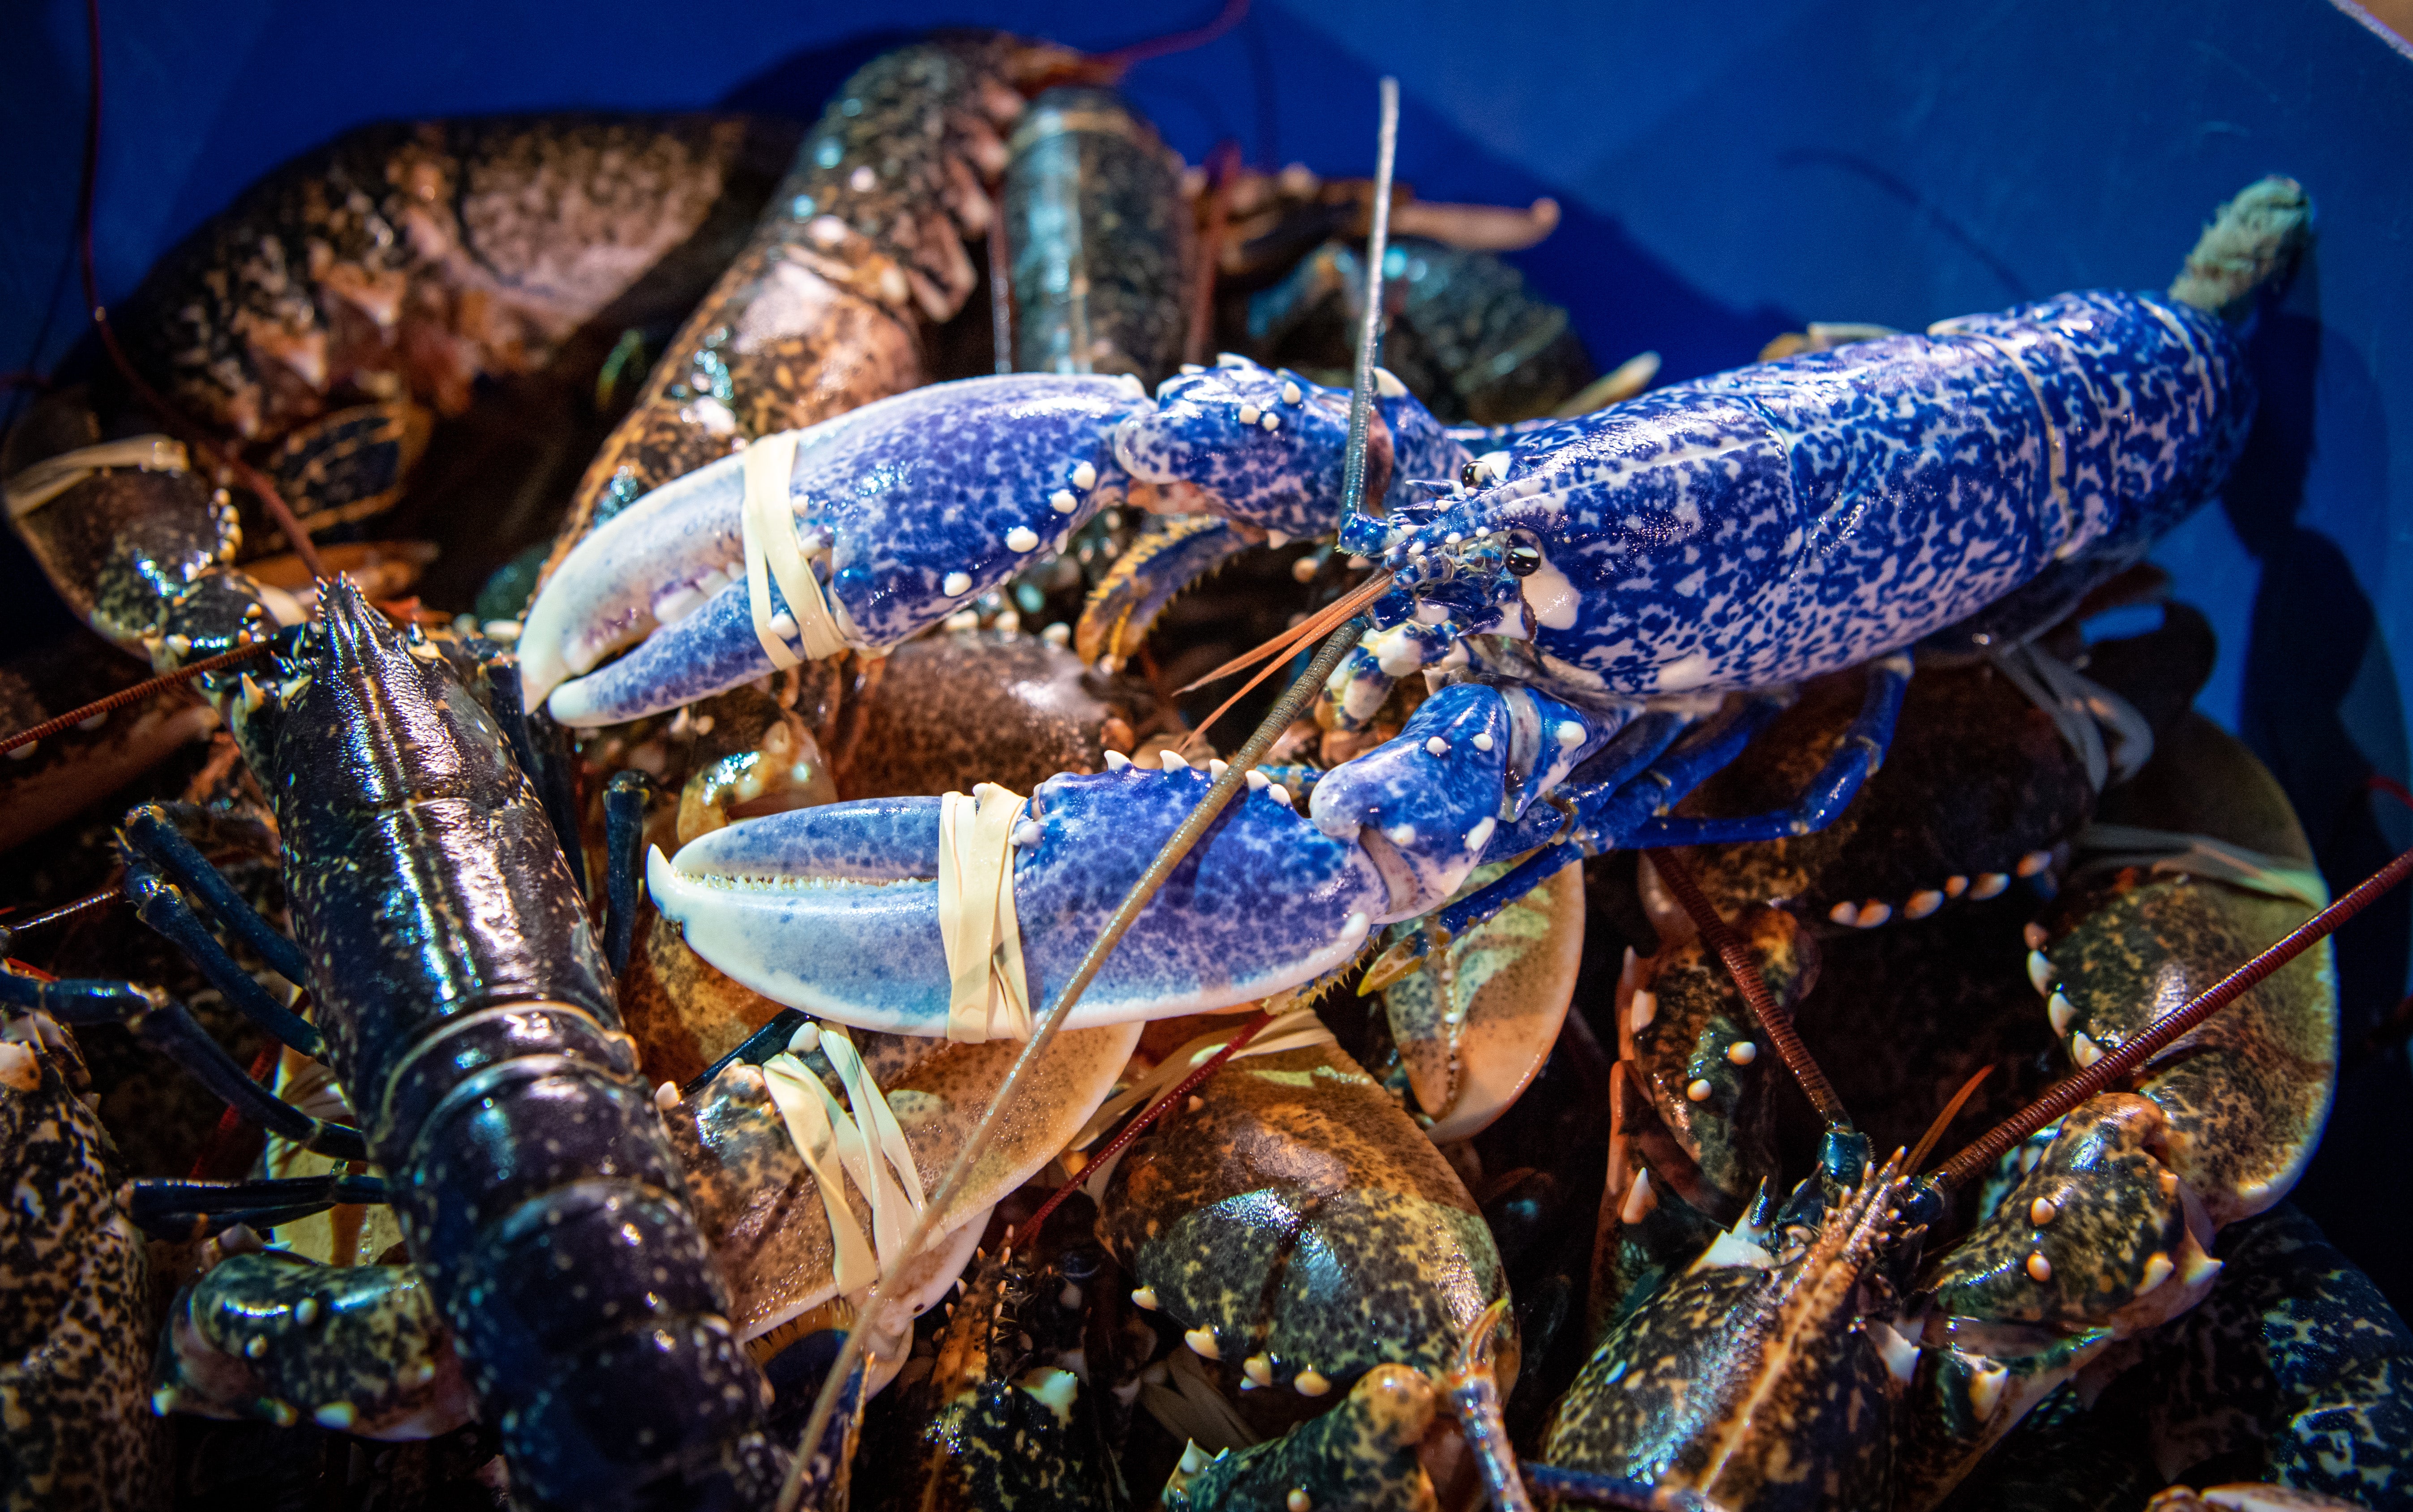 A rare blue lobster was discovered in a Rochdale pub’s seafood order earlier this week